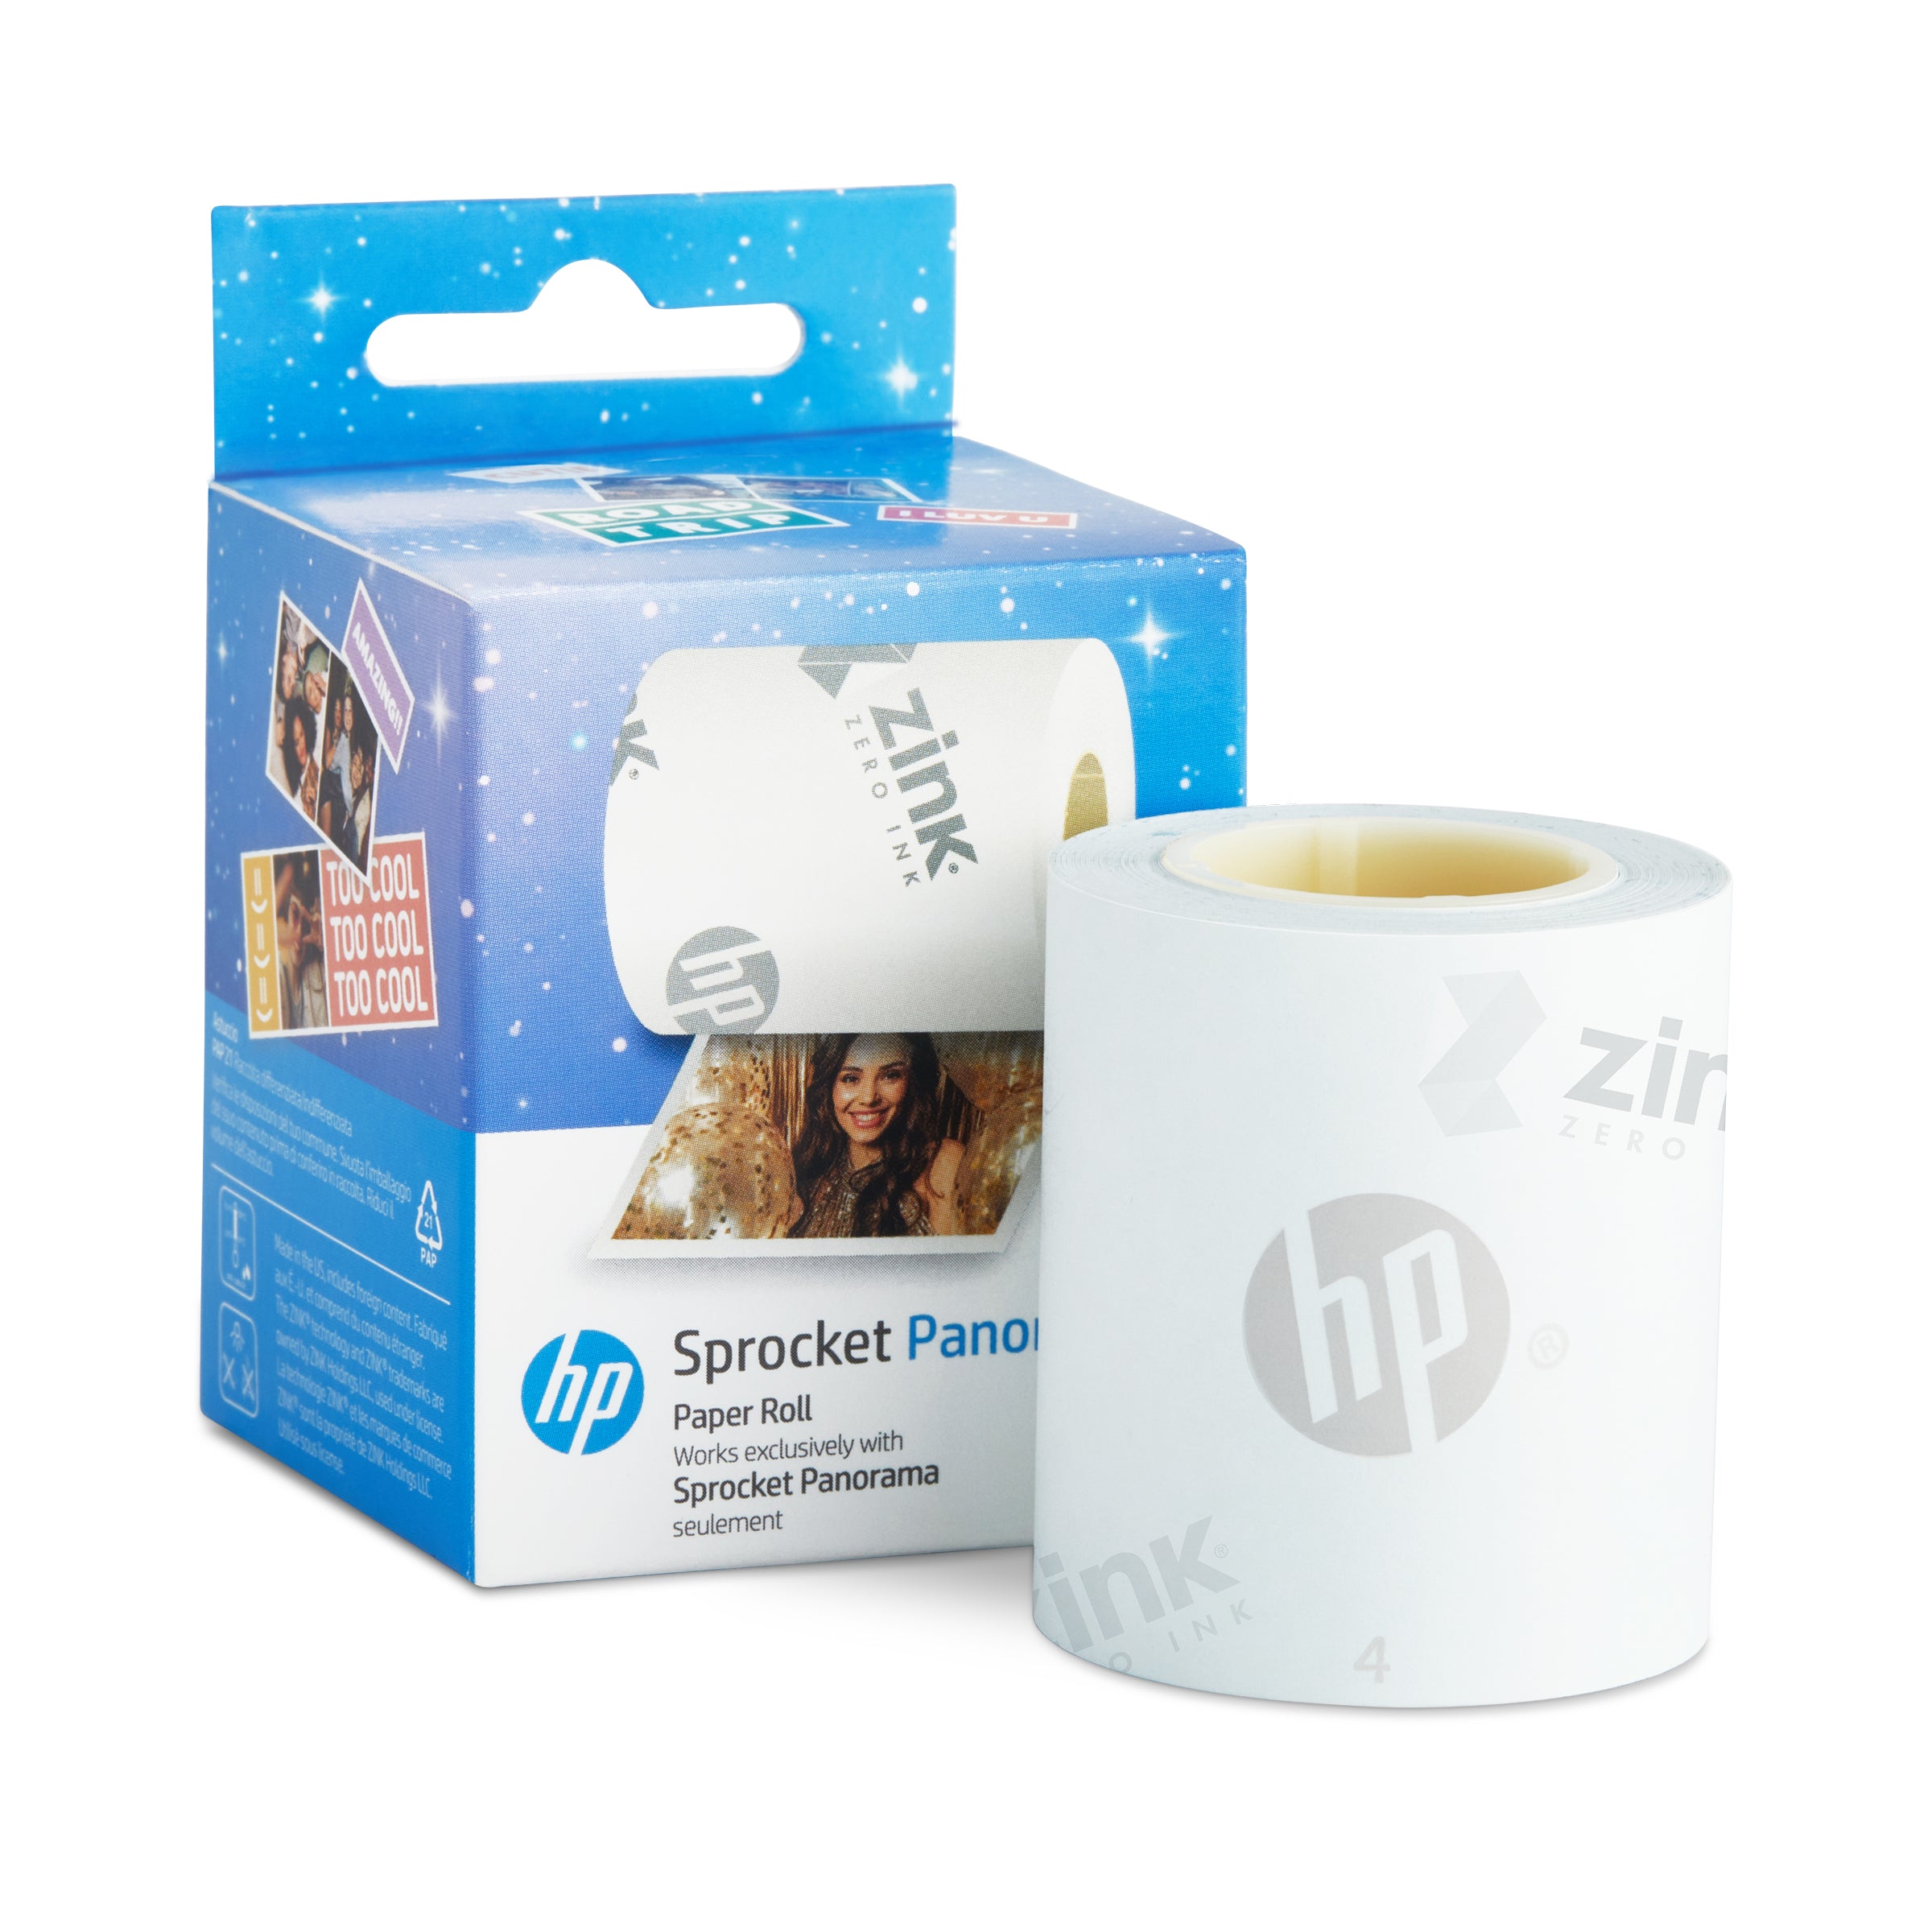 HP Sprocket Panorama Instant Portable Color Label & Photo Printer (Pink) Starter Bundle with case and HP Zink roll Sprocket Printers